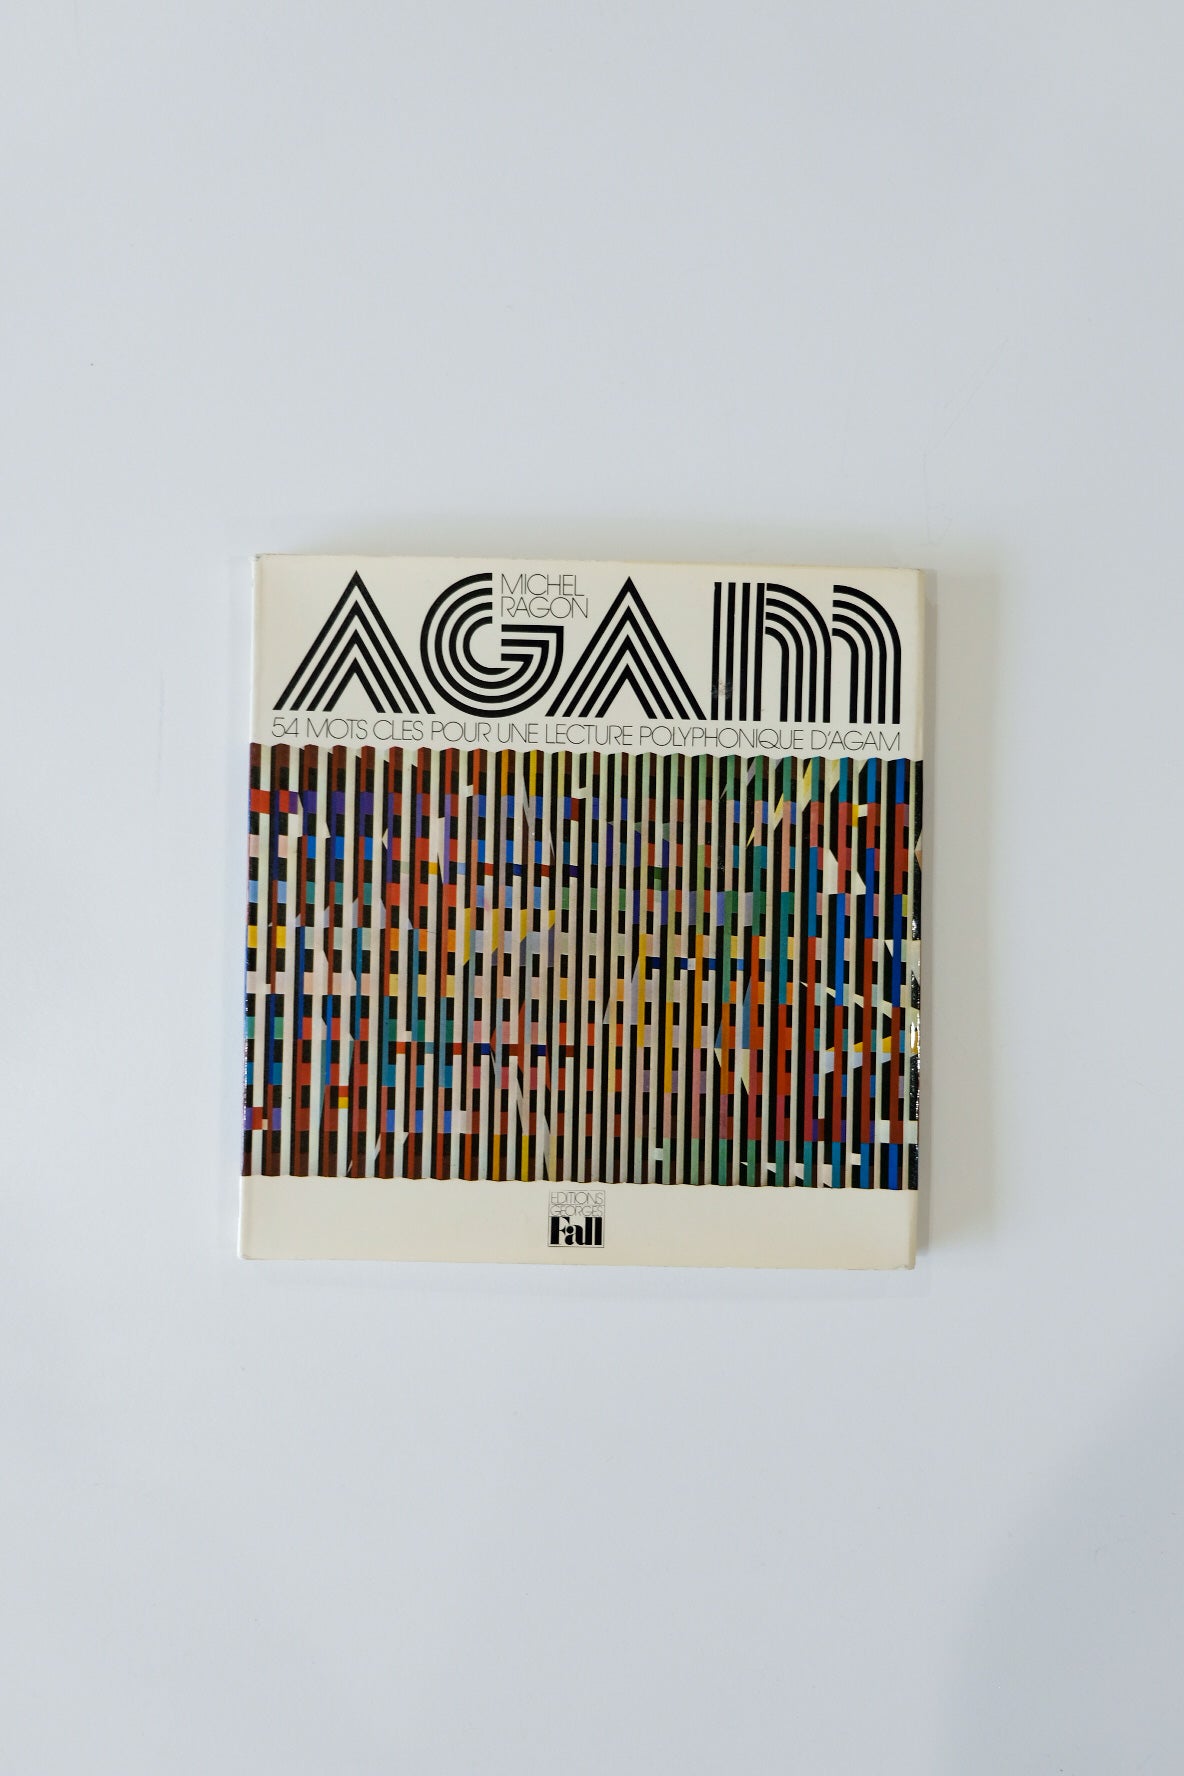 AGAM. 54 key words for a polyphonic reading of Agam